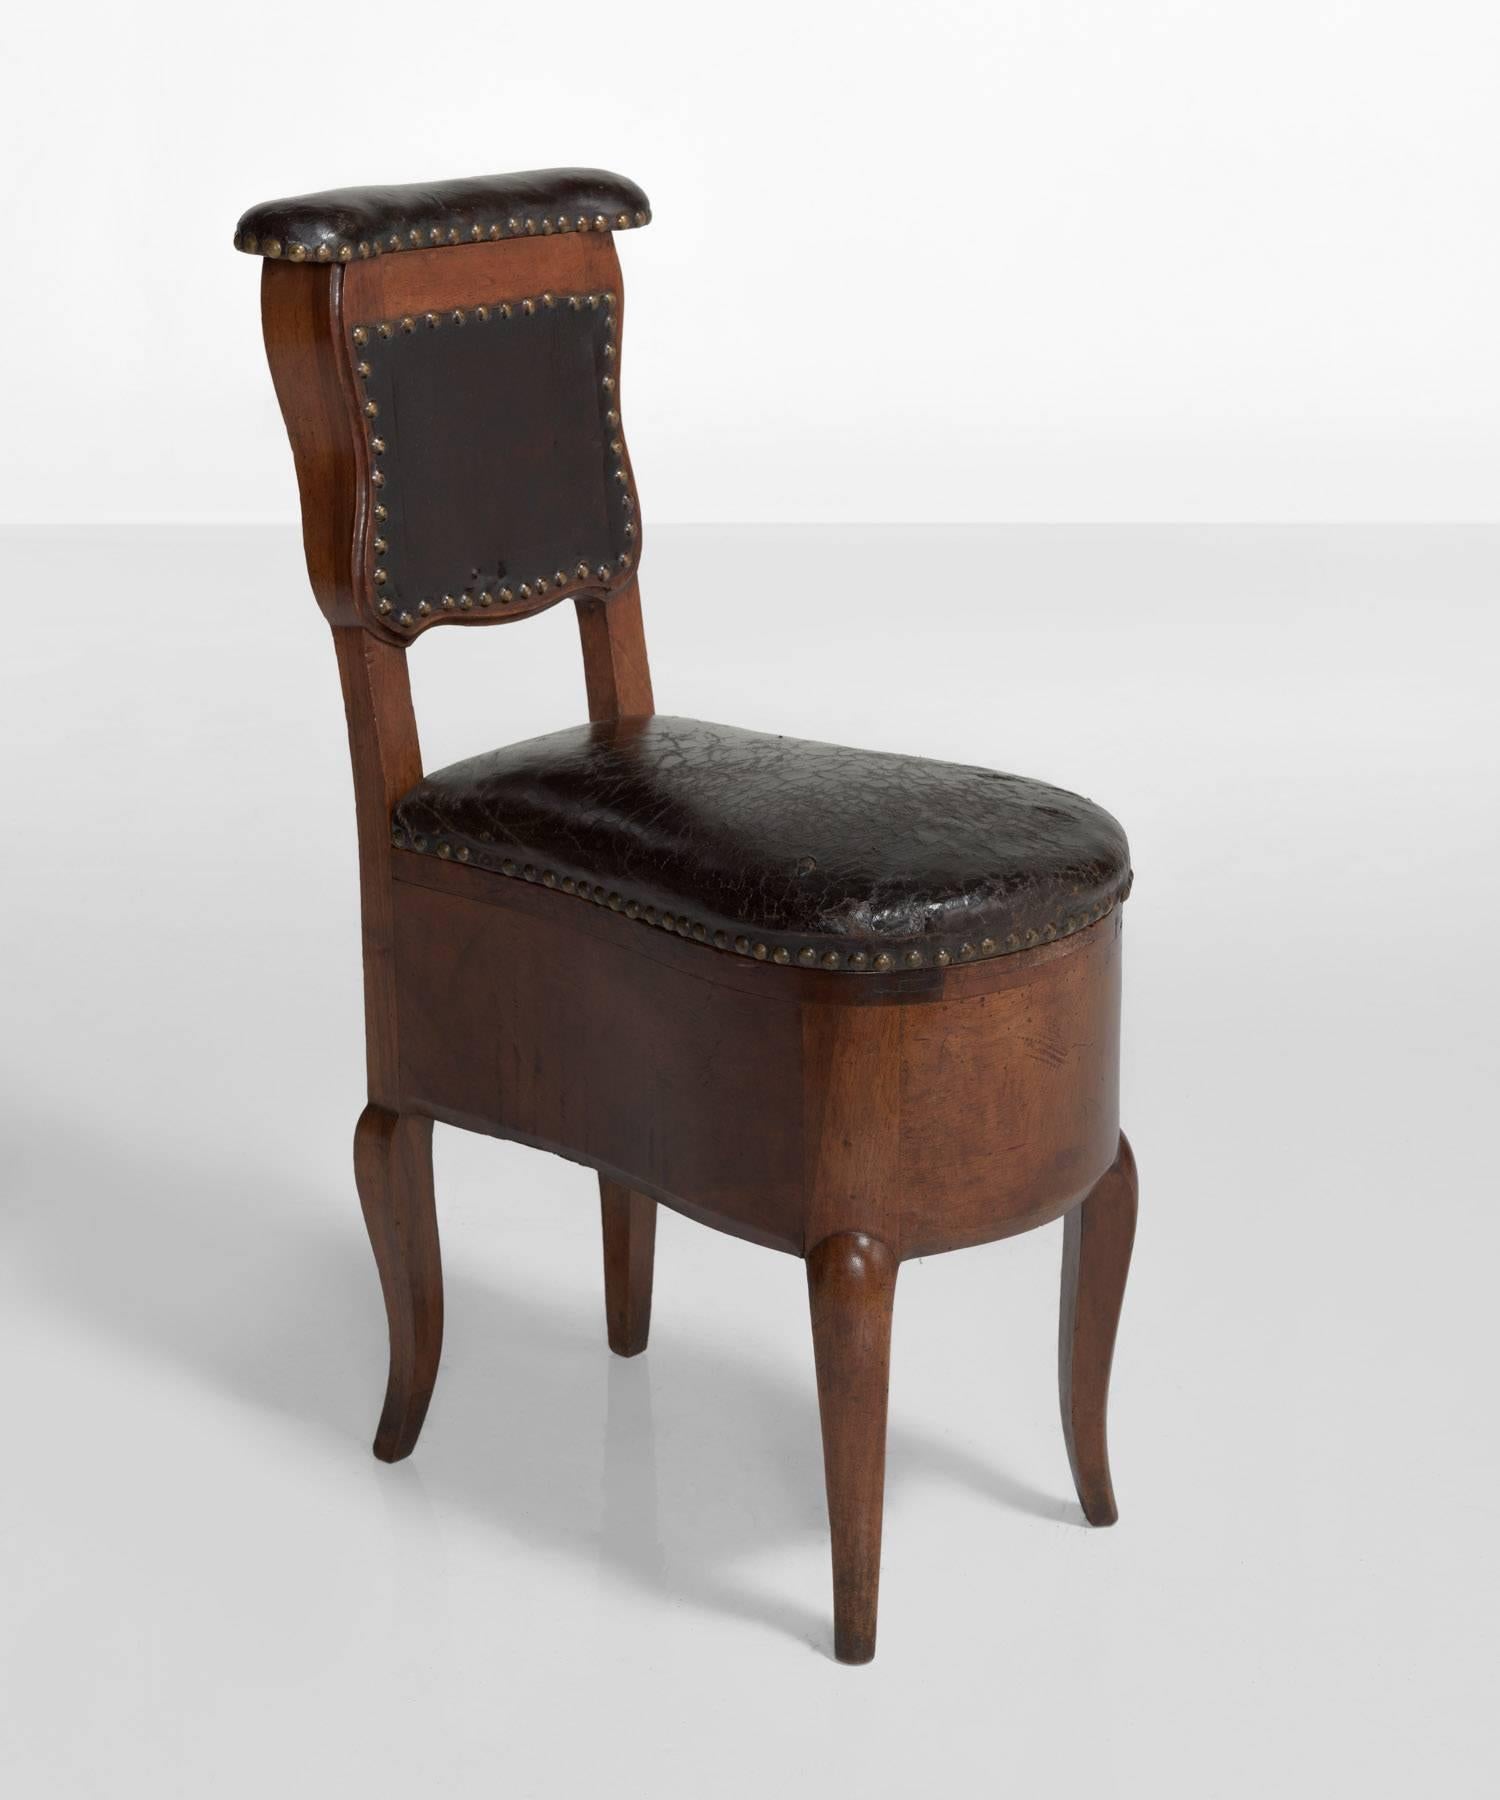 Mahogany and leather Prie Dieu chair, France, circa 1780.

Carved mahogany devotional chair with storage under seat and behind back. In original condition. Unique form. Well worn leather with brass studs.